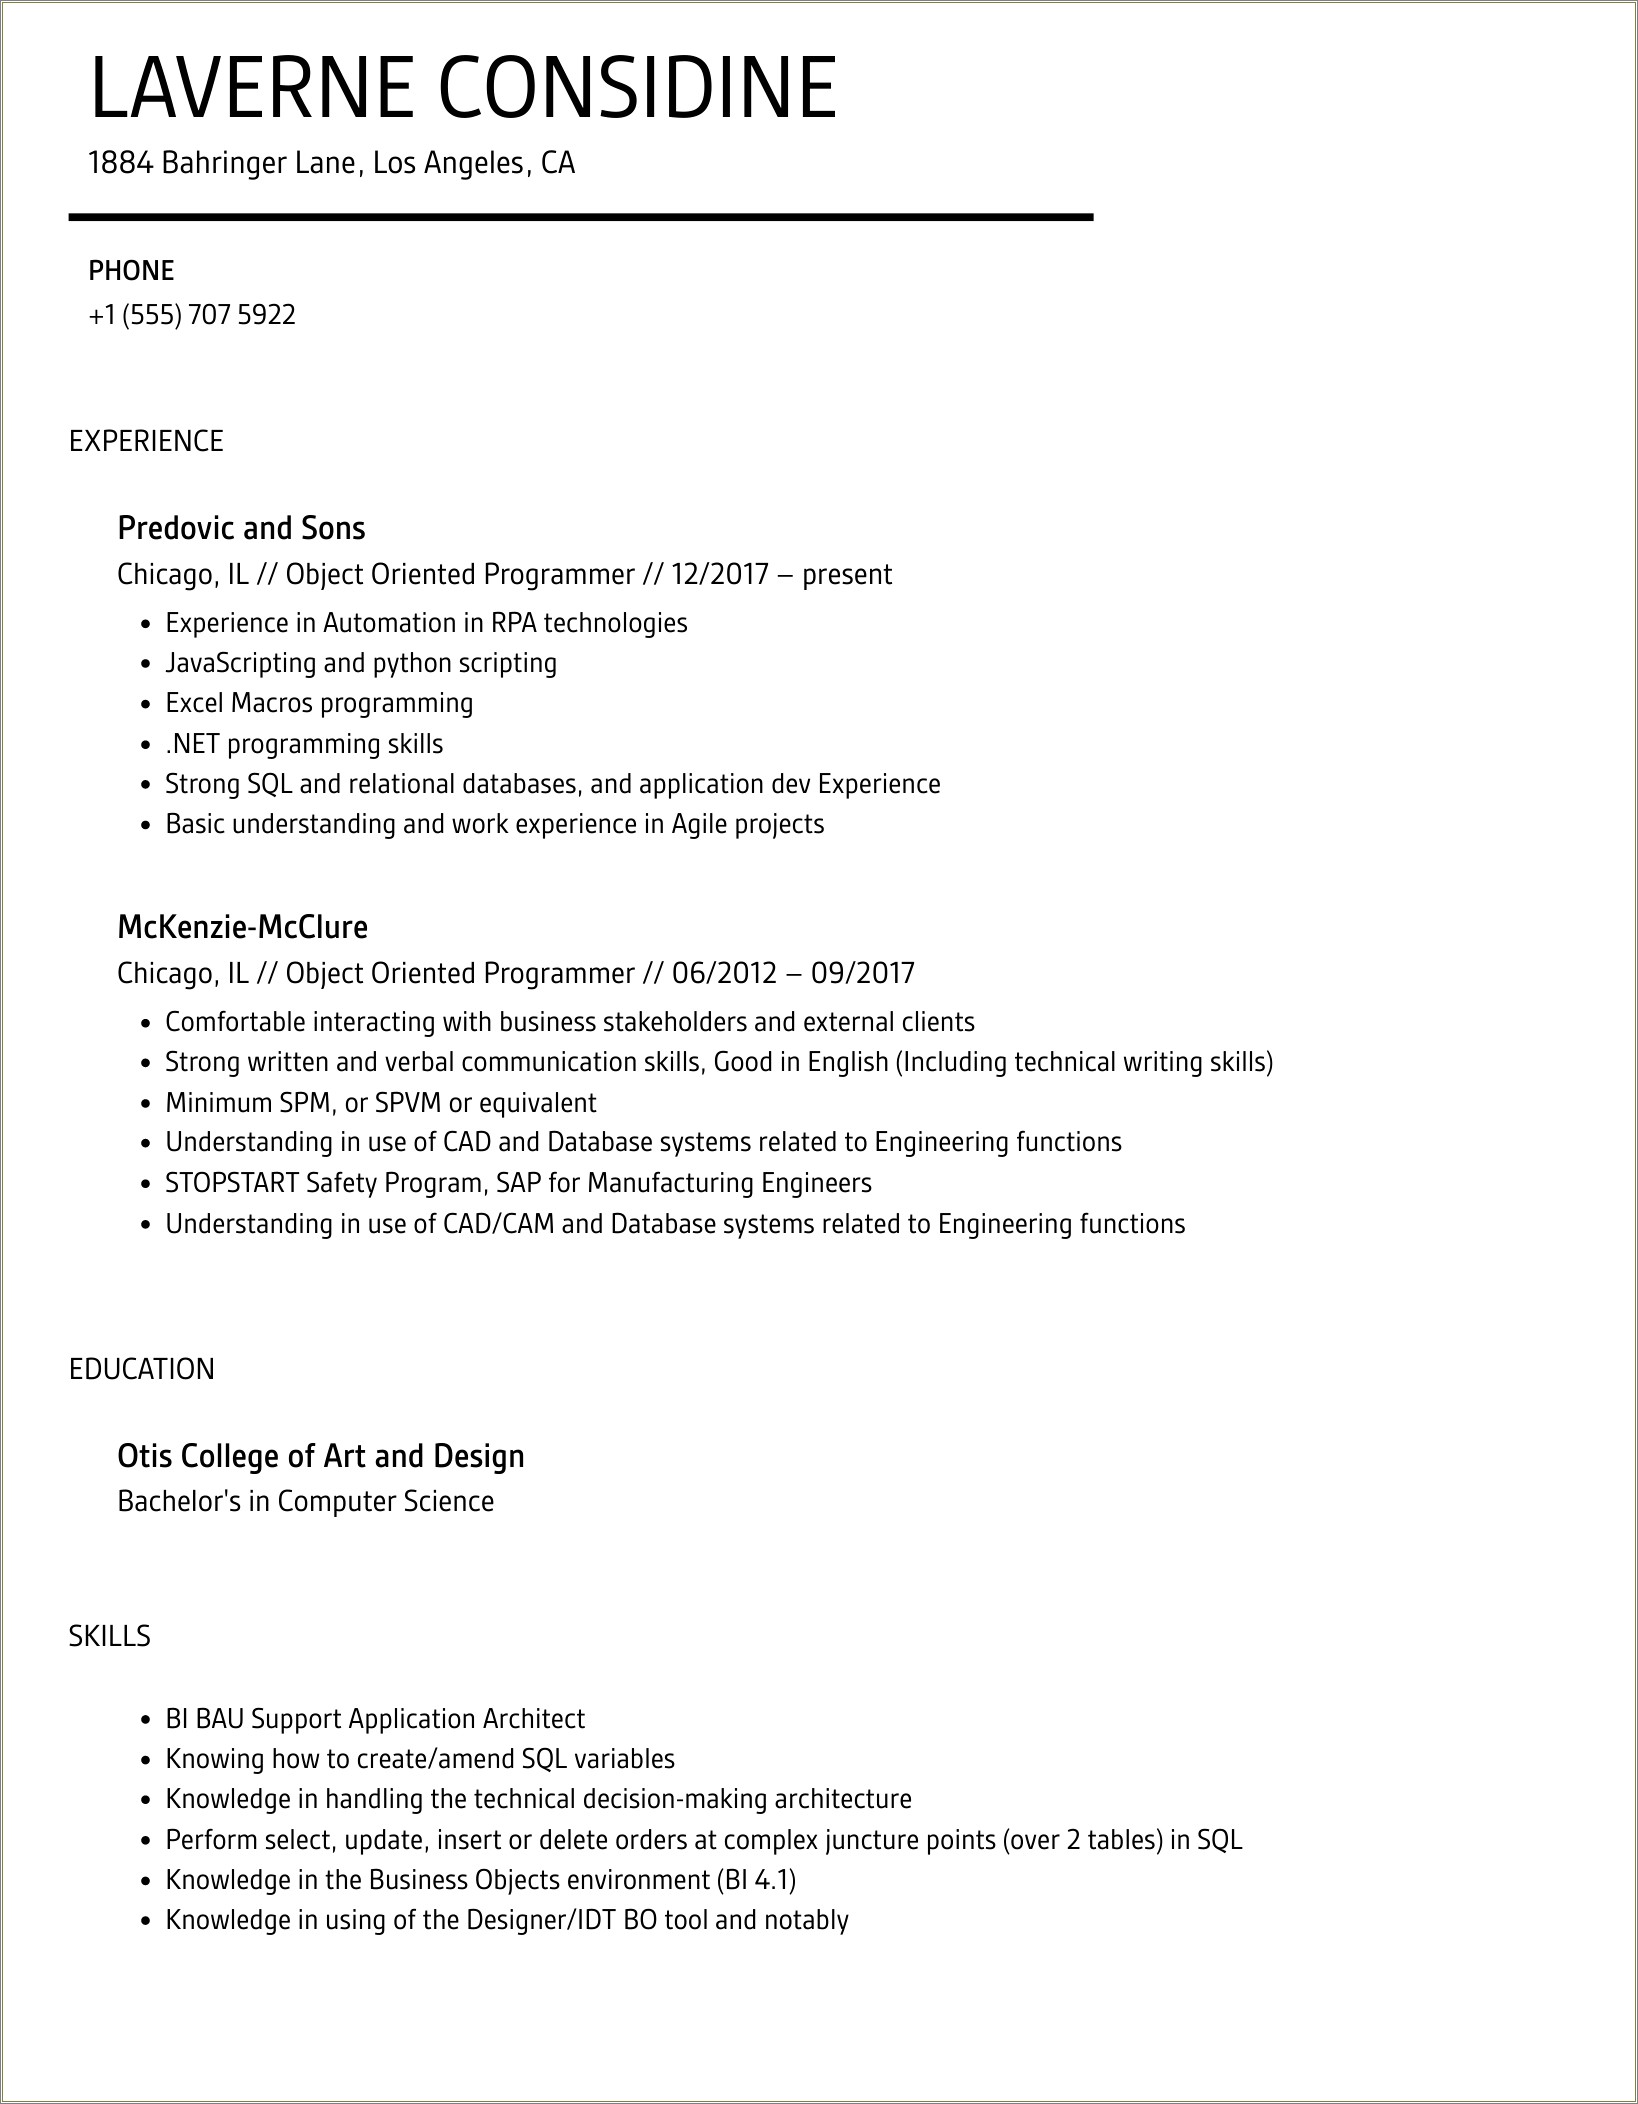 Implementation Object Oriented Programming In The Resume